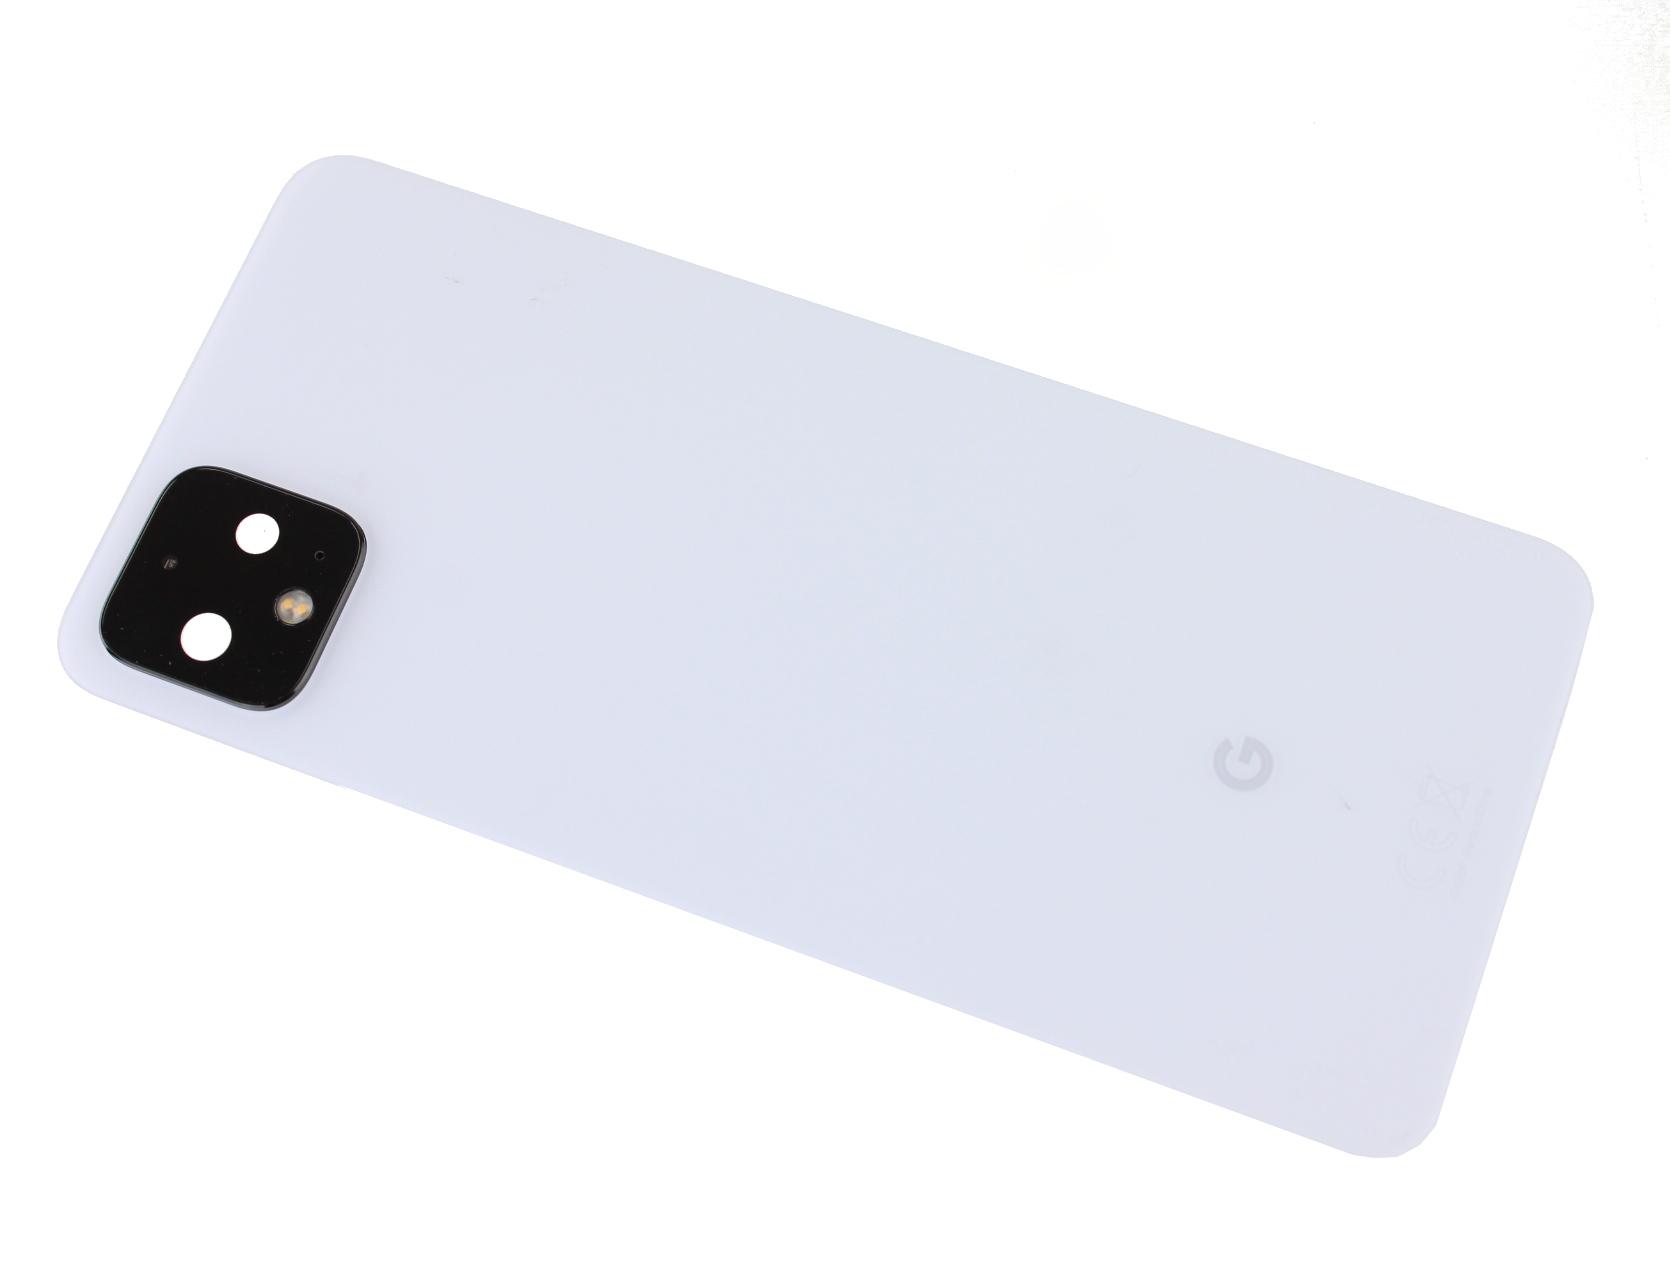 Original battery cover Google Pixel 4 XL (G020P) white disassembly